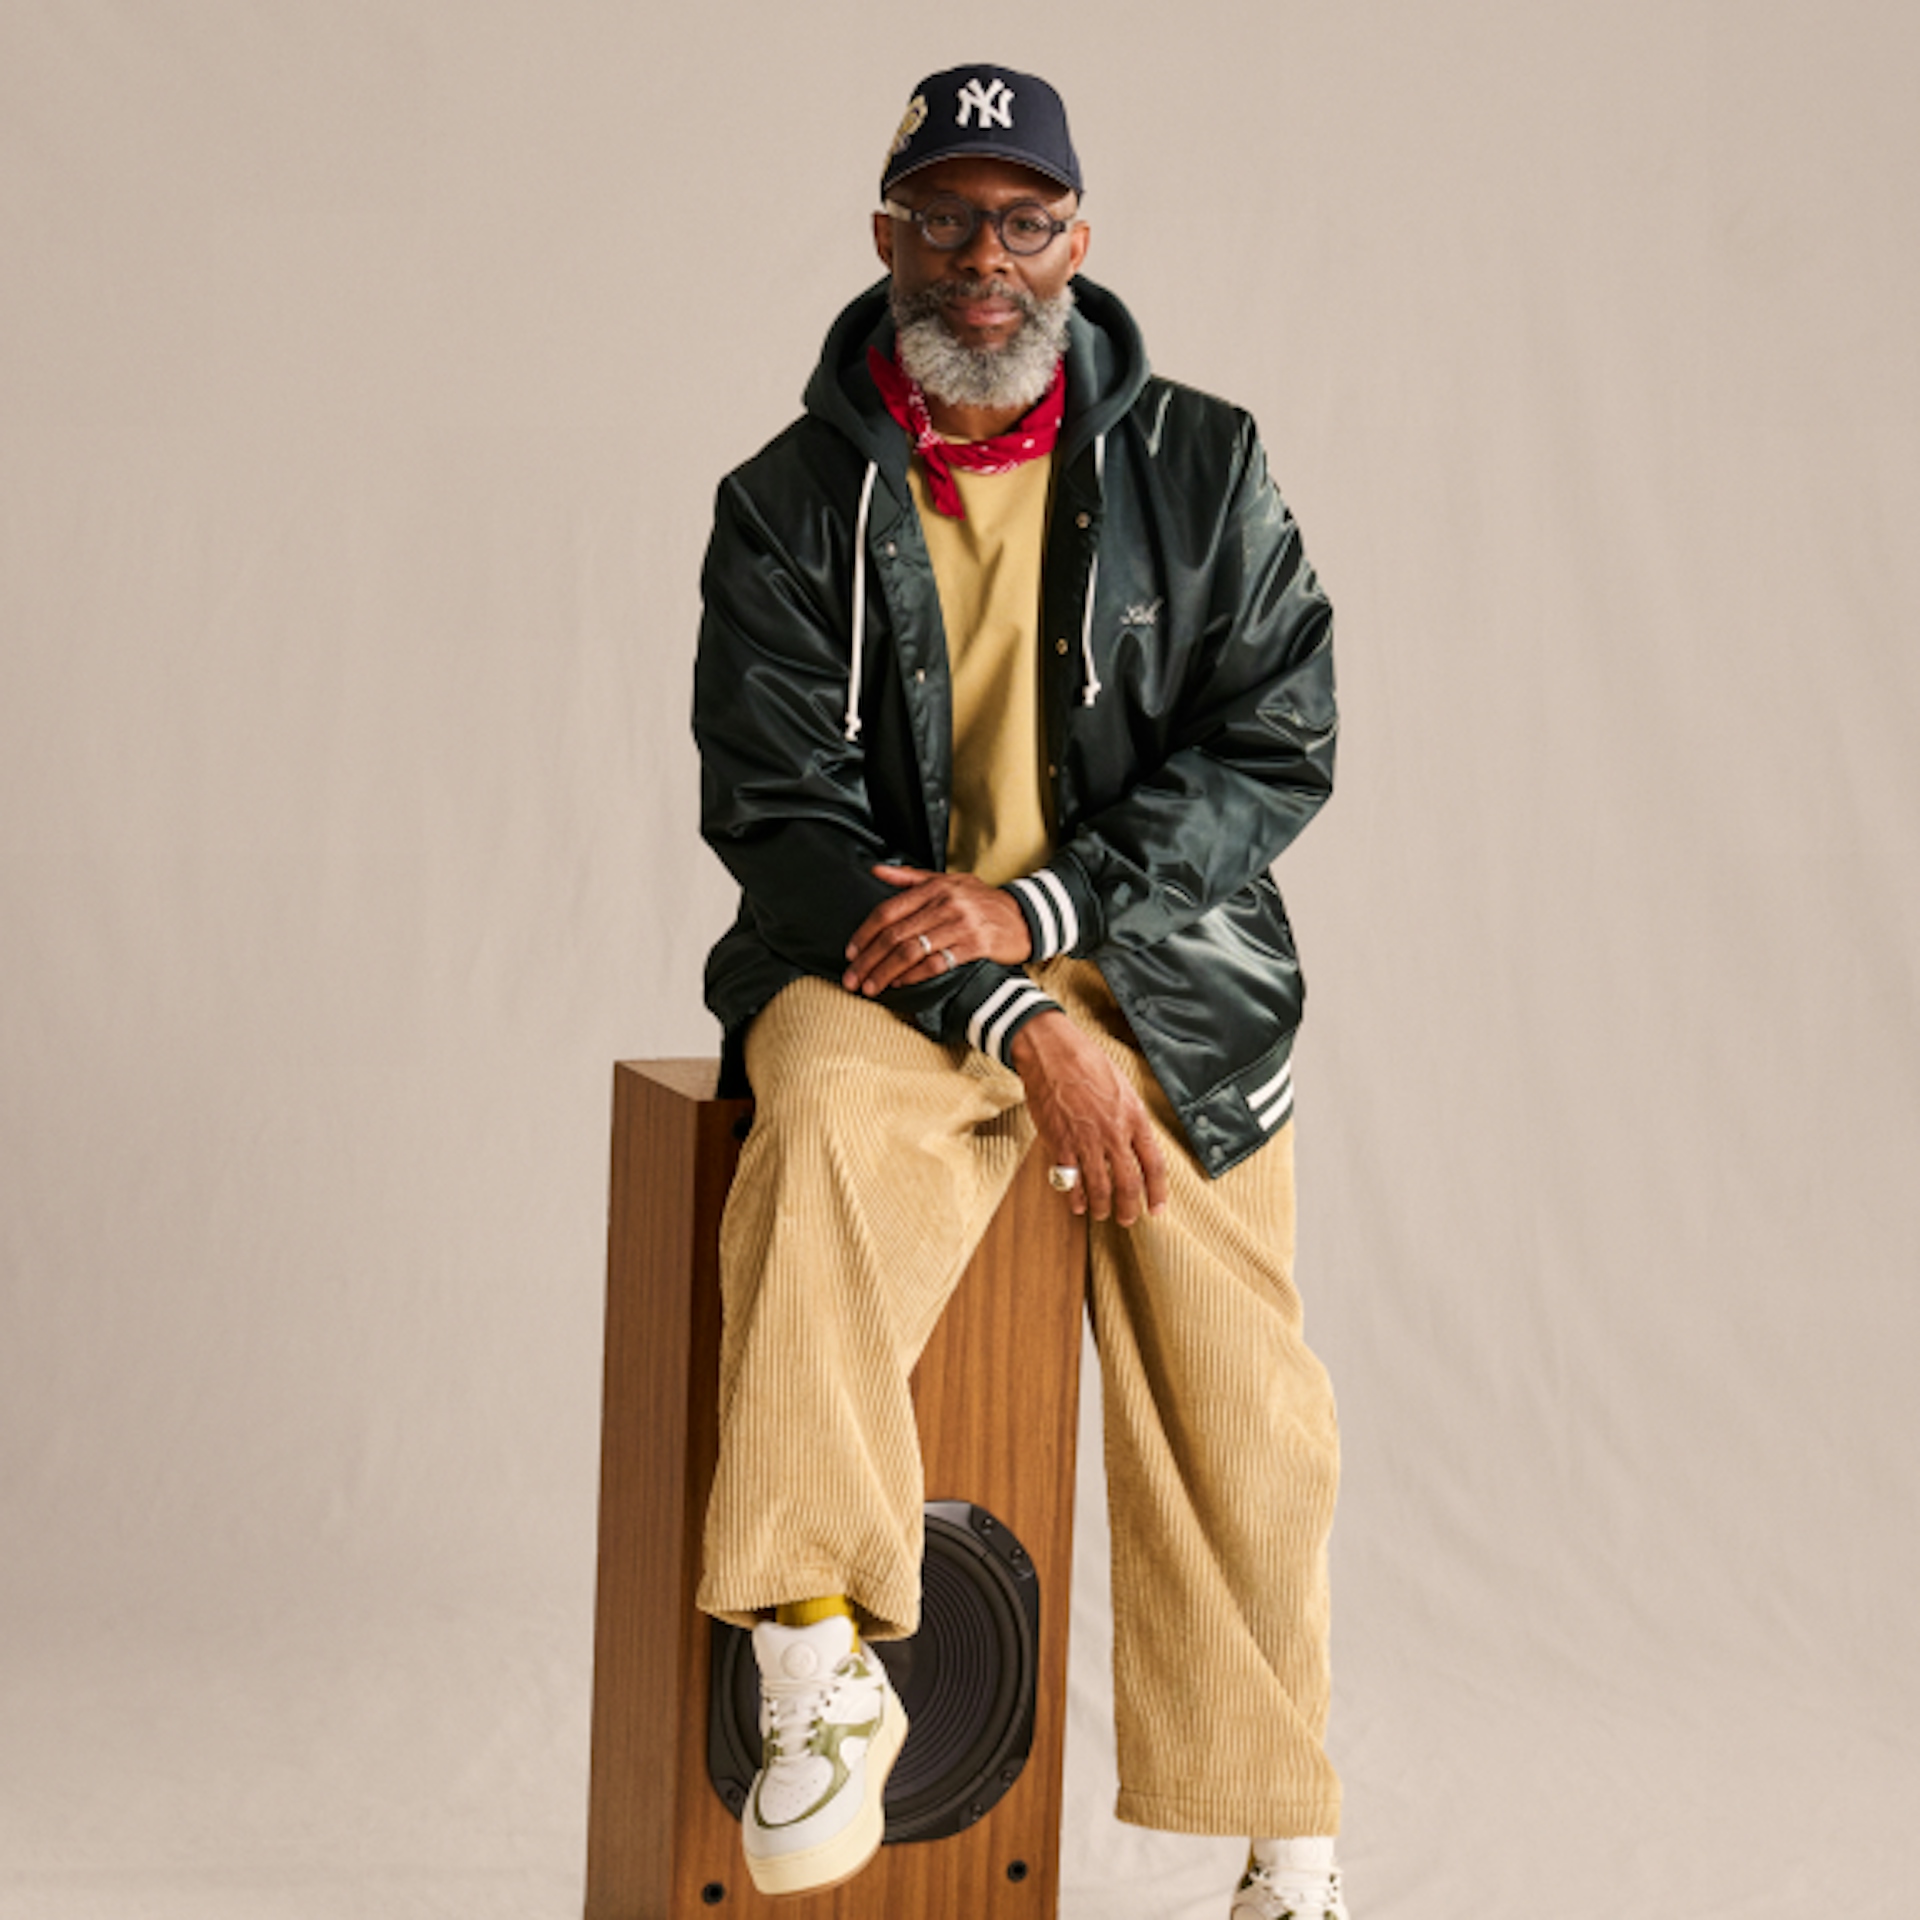 An older man with a beard is sitting on a wooden speaker. He is wearing a black baseball cap, glasses, a red bandana, a black jacket, a beige sweatshirt, and beige corduroy pants. He exudes a casual and stylish vibe.